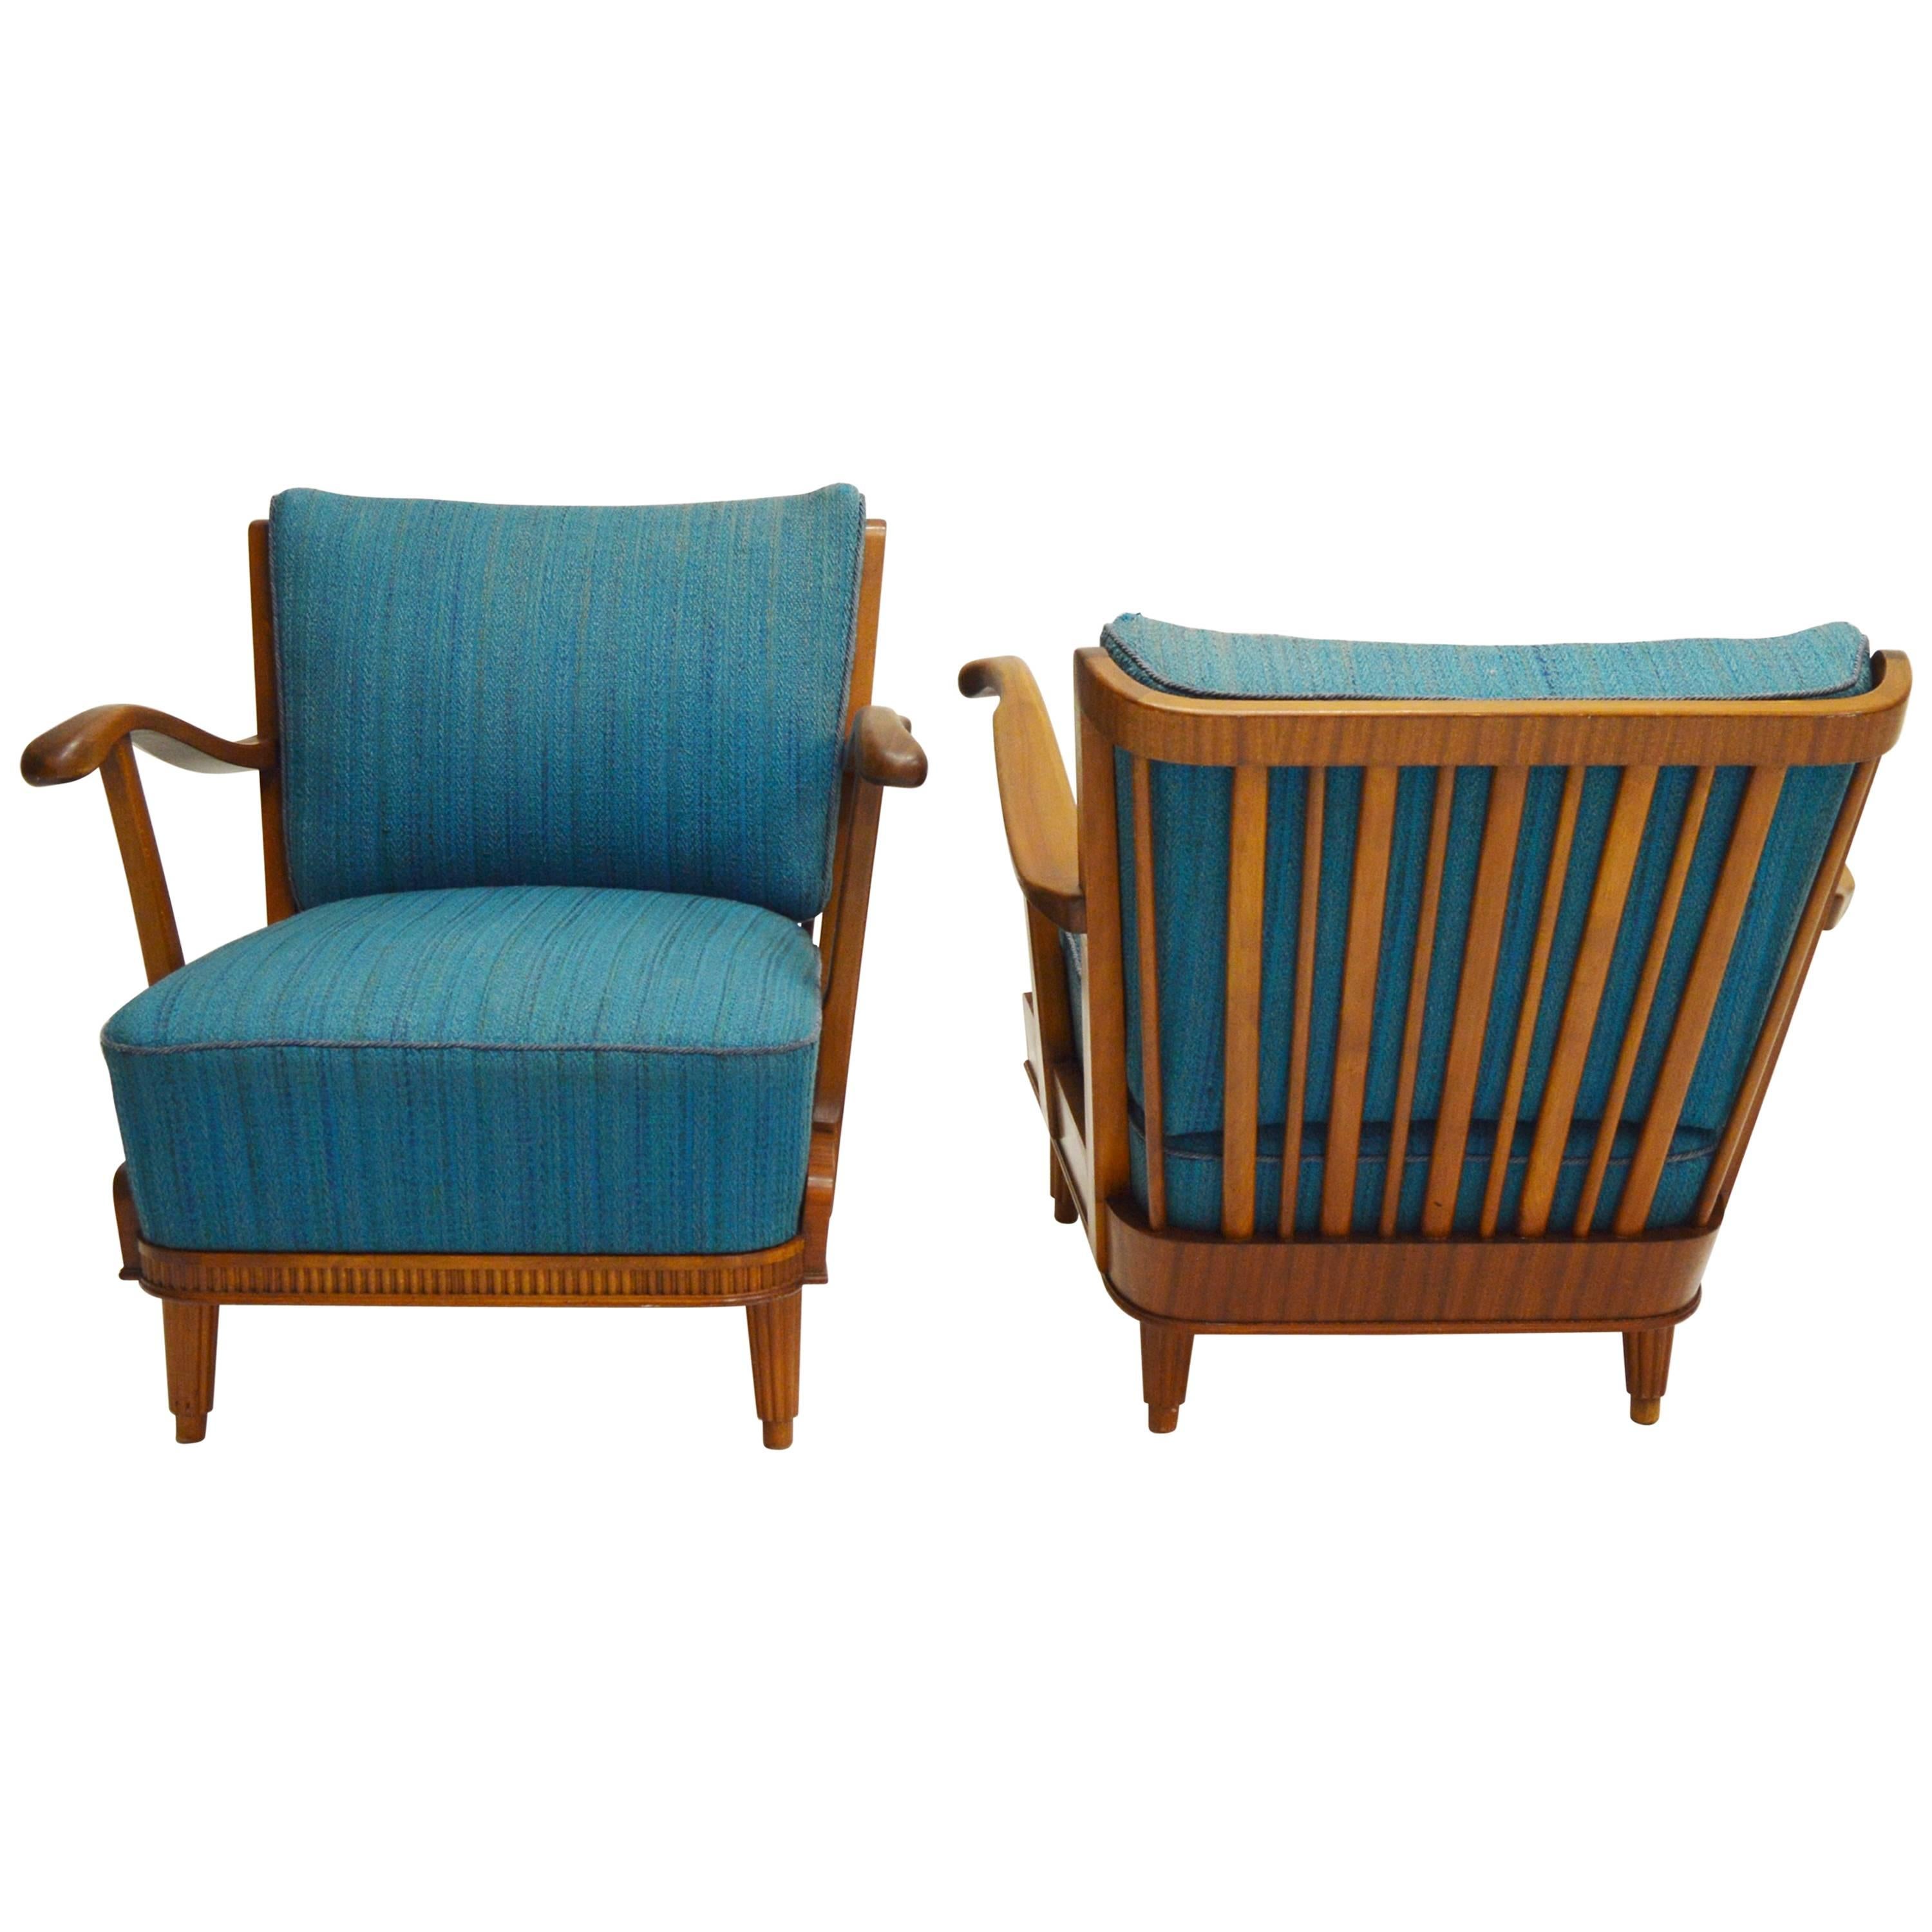 Pair of Svante Skogh Mahogany Lounge Chairs For Sale